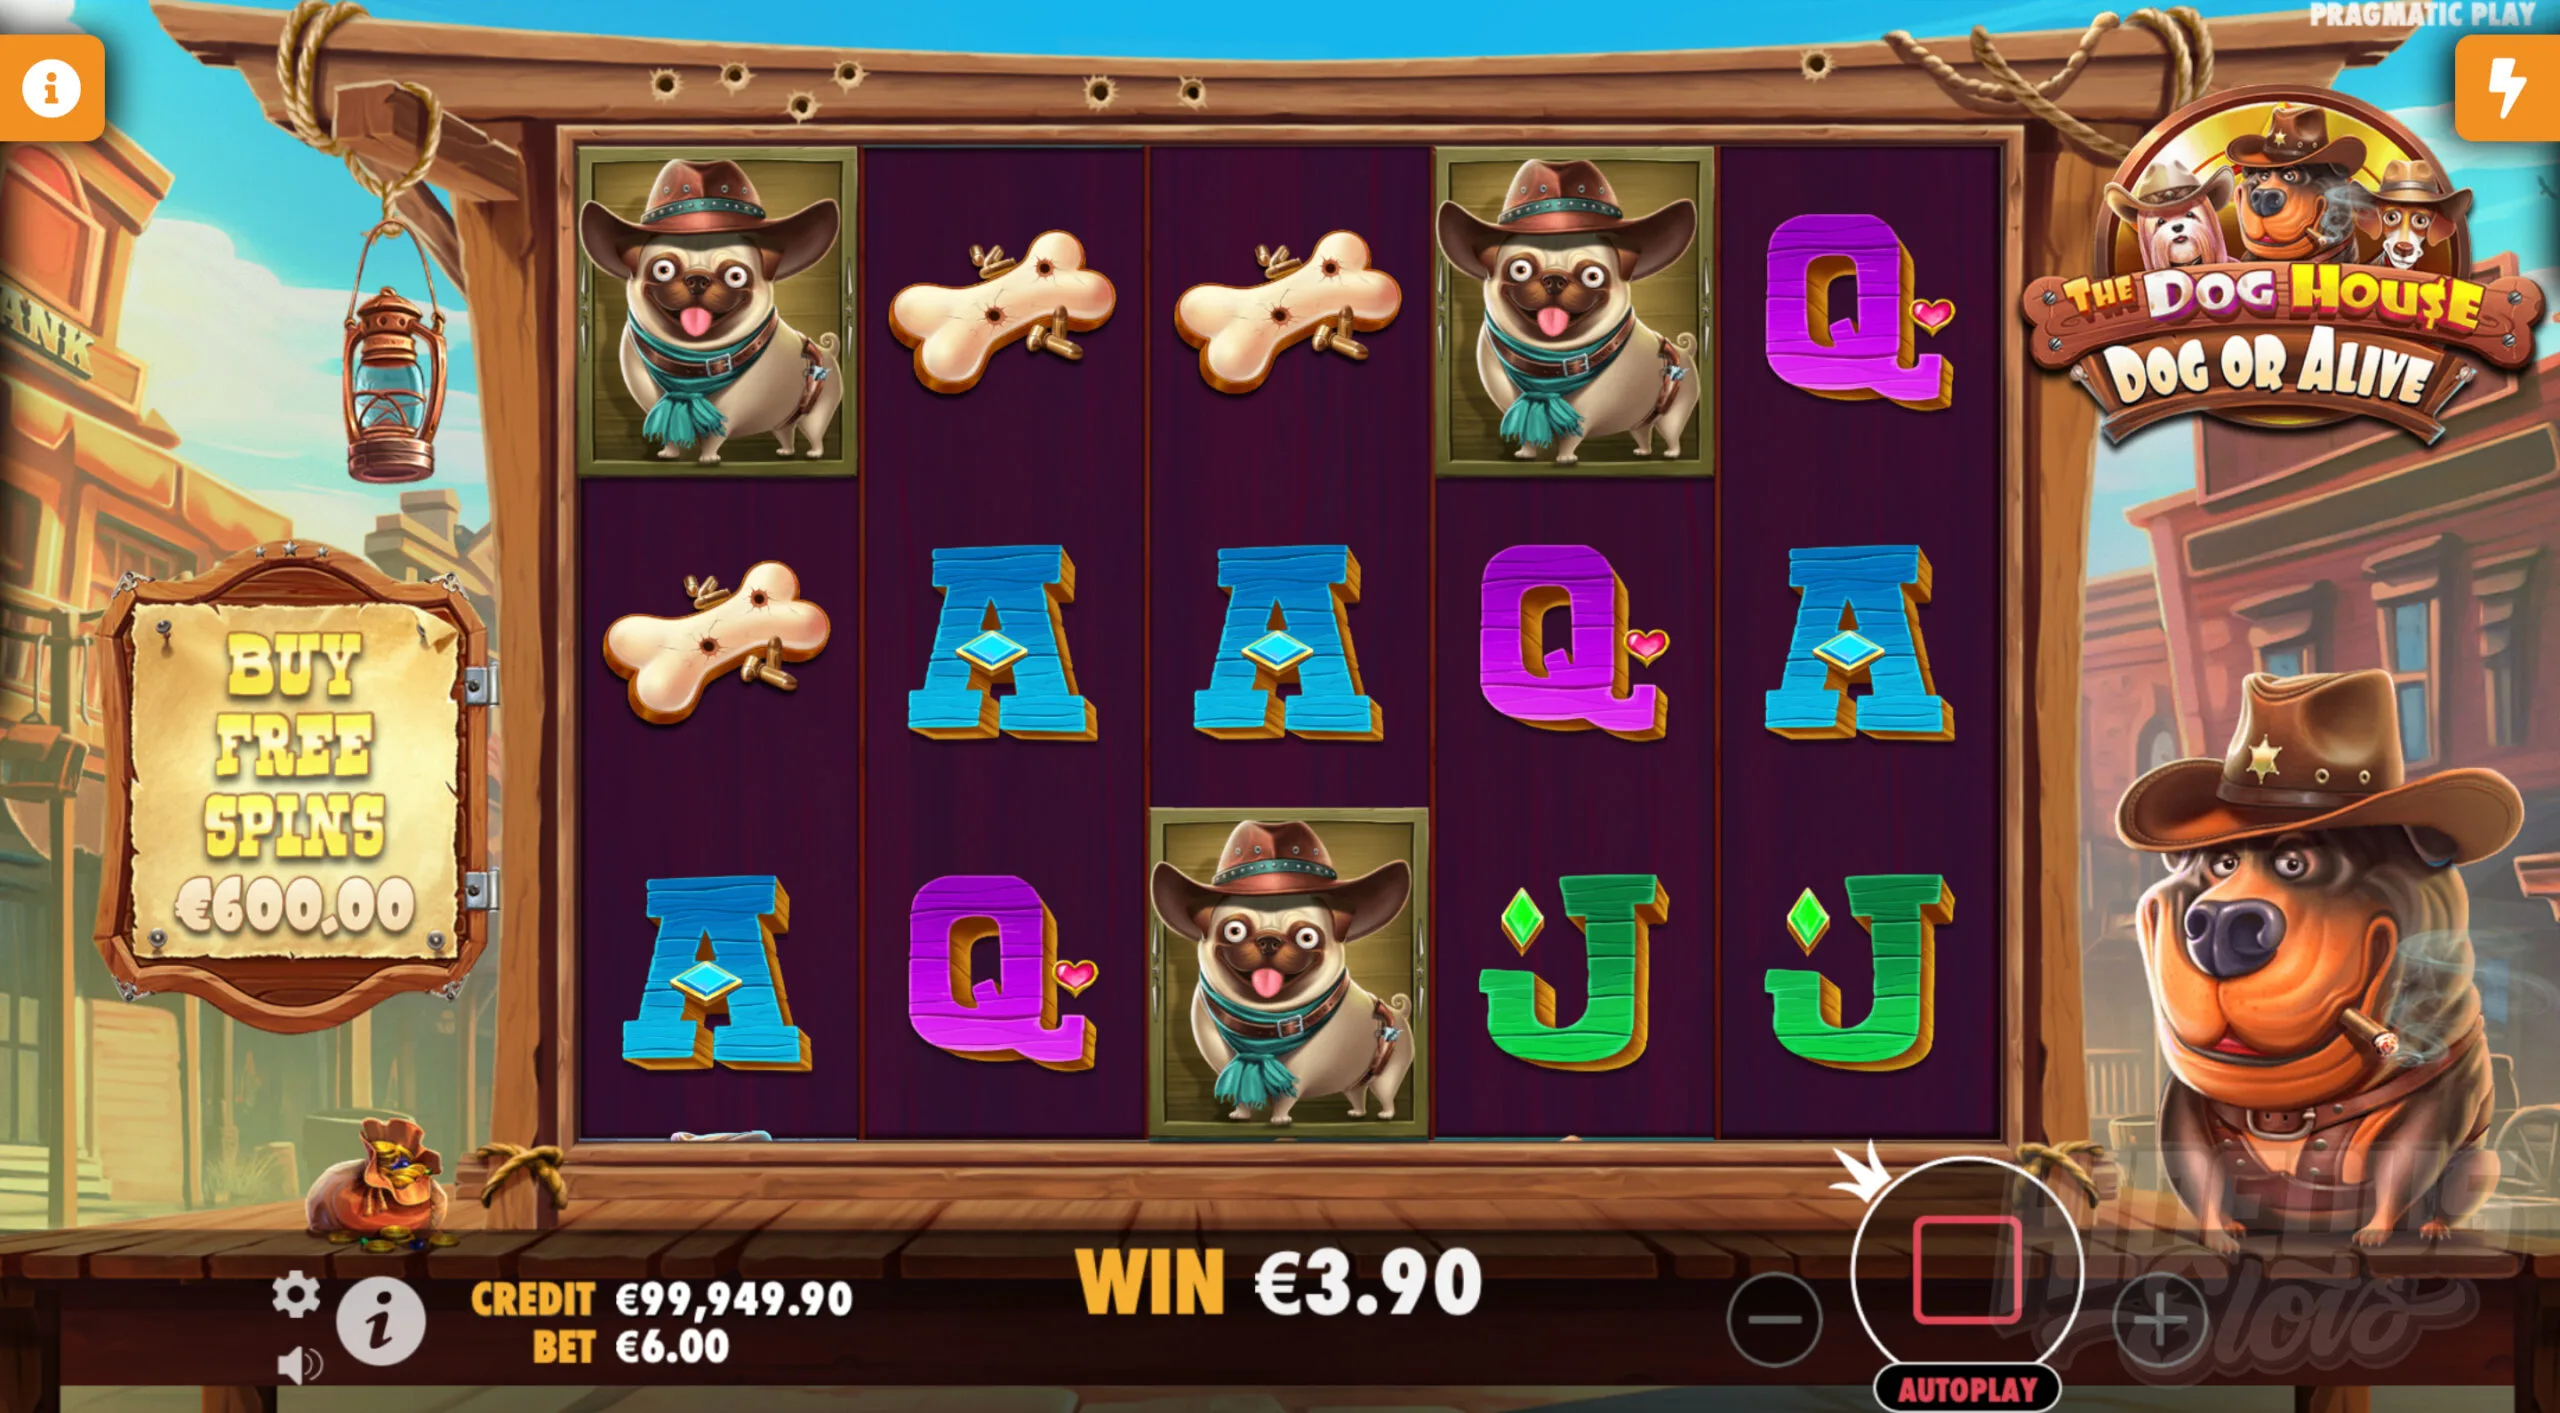 The Dog House - Dog or Alive Offers Players 20 Fixed Win Lines